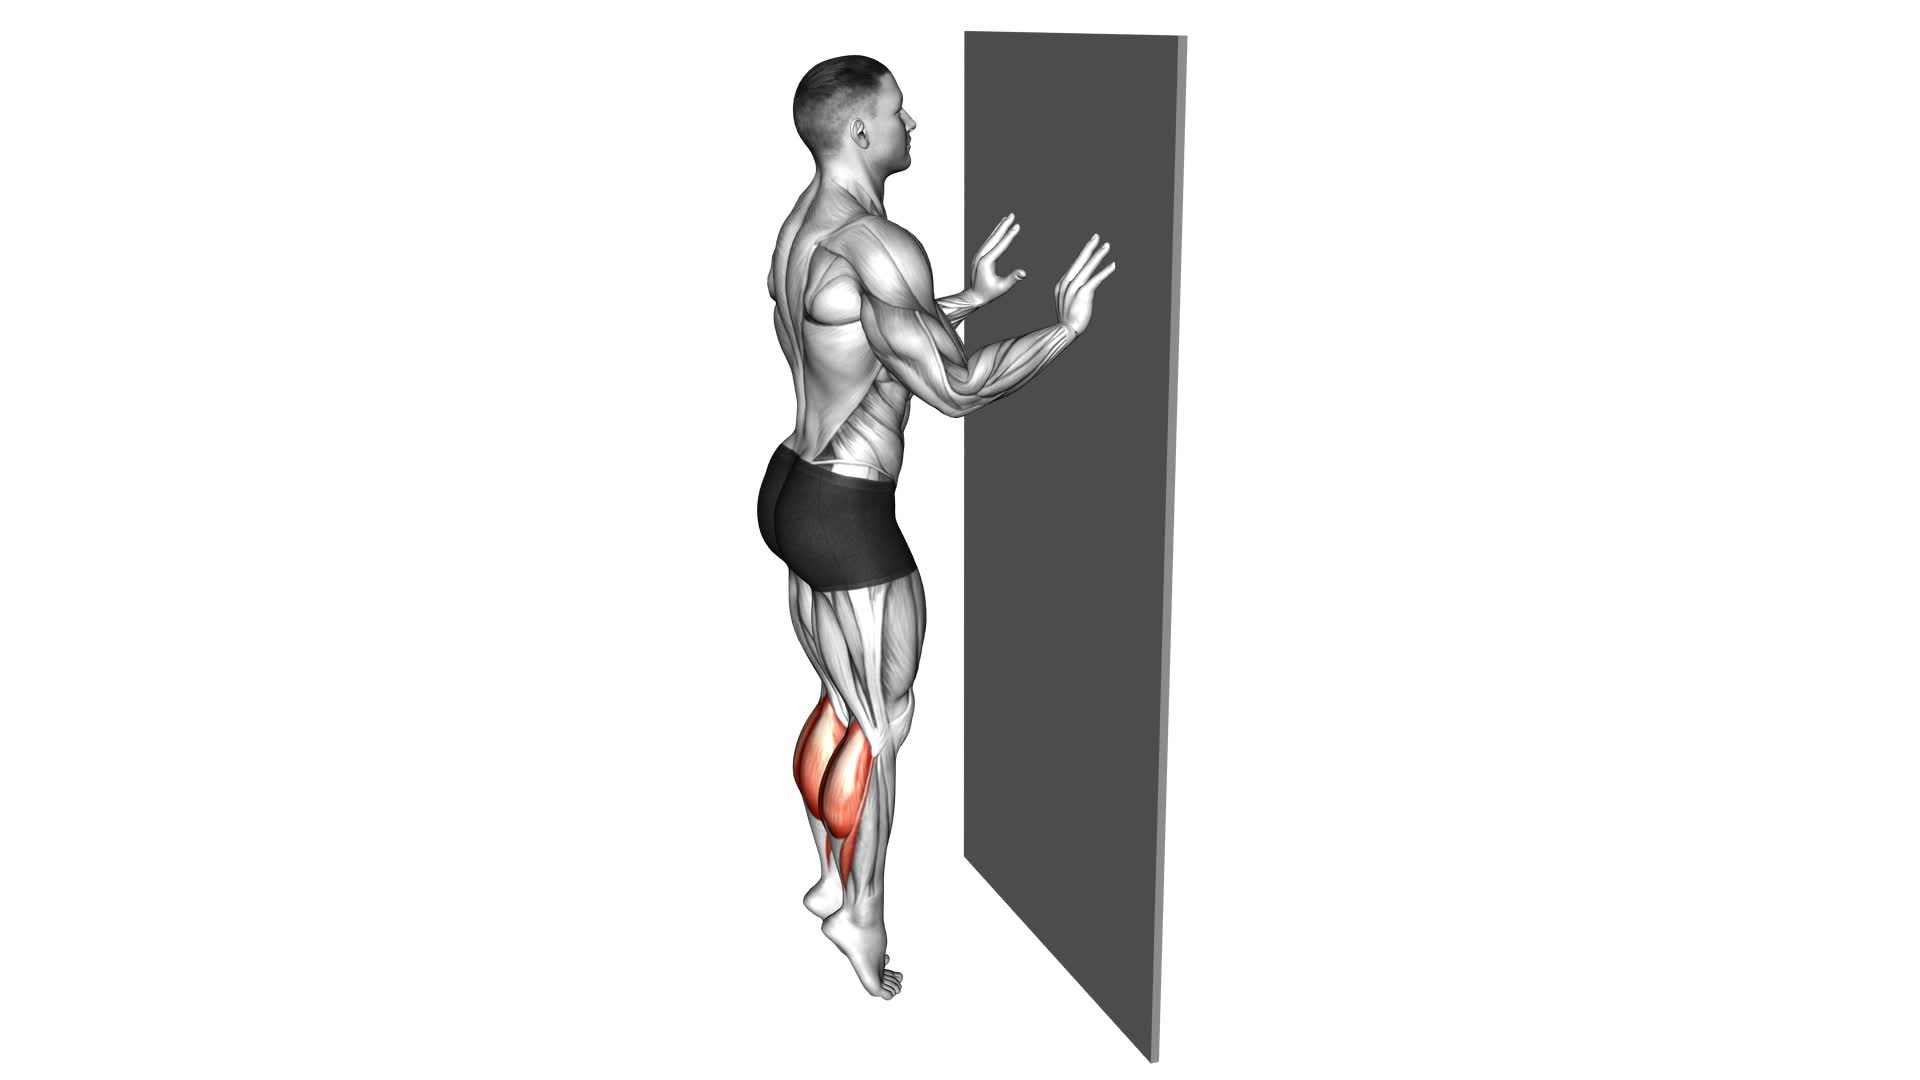 Calf Raise With Wall Support - Video Exercise Guide & Tips